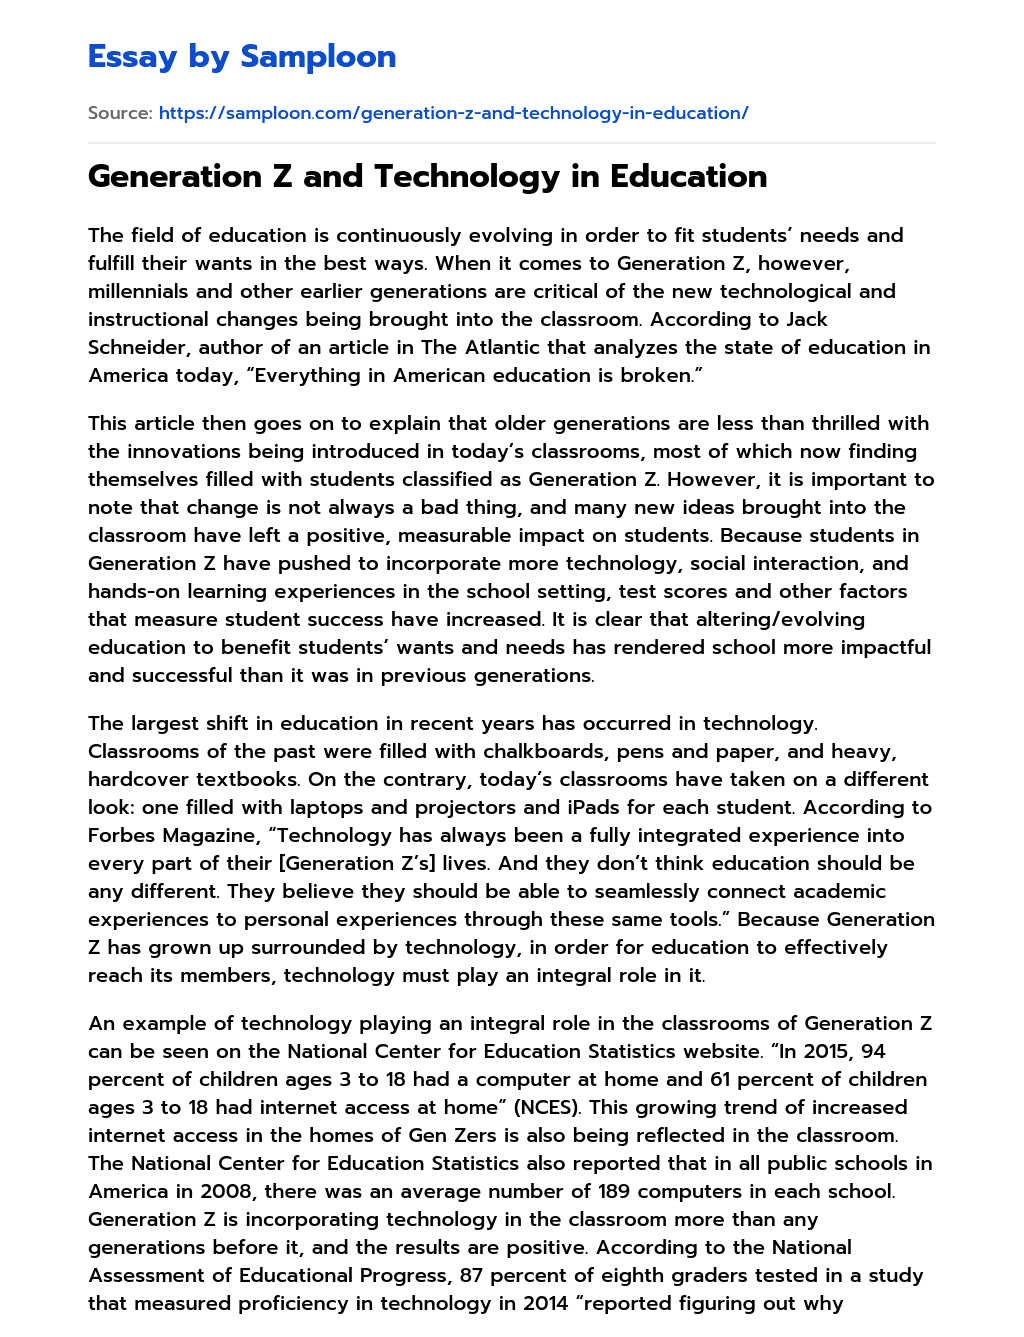 Generation Z and Technology in Education essay